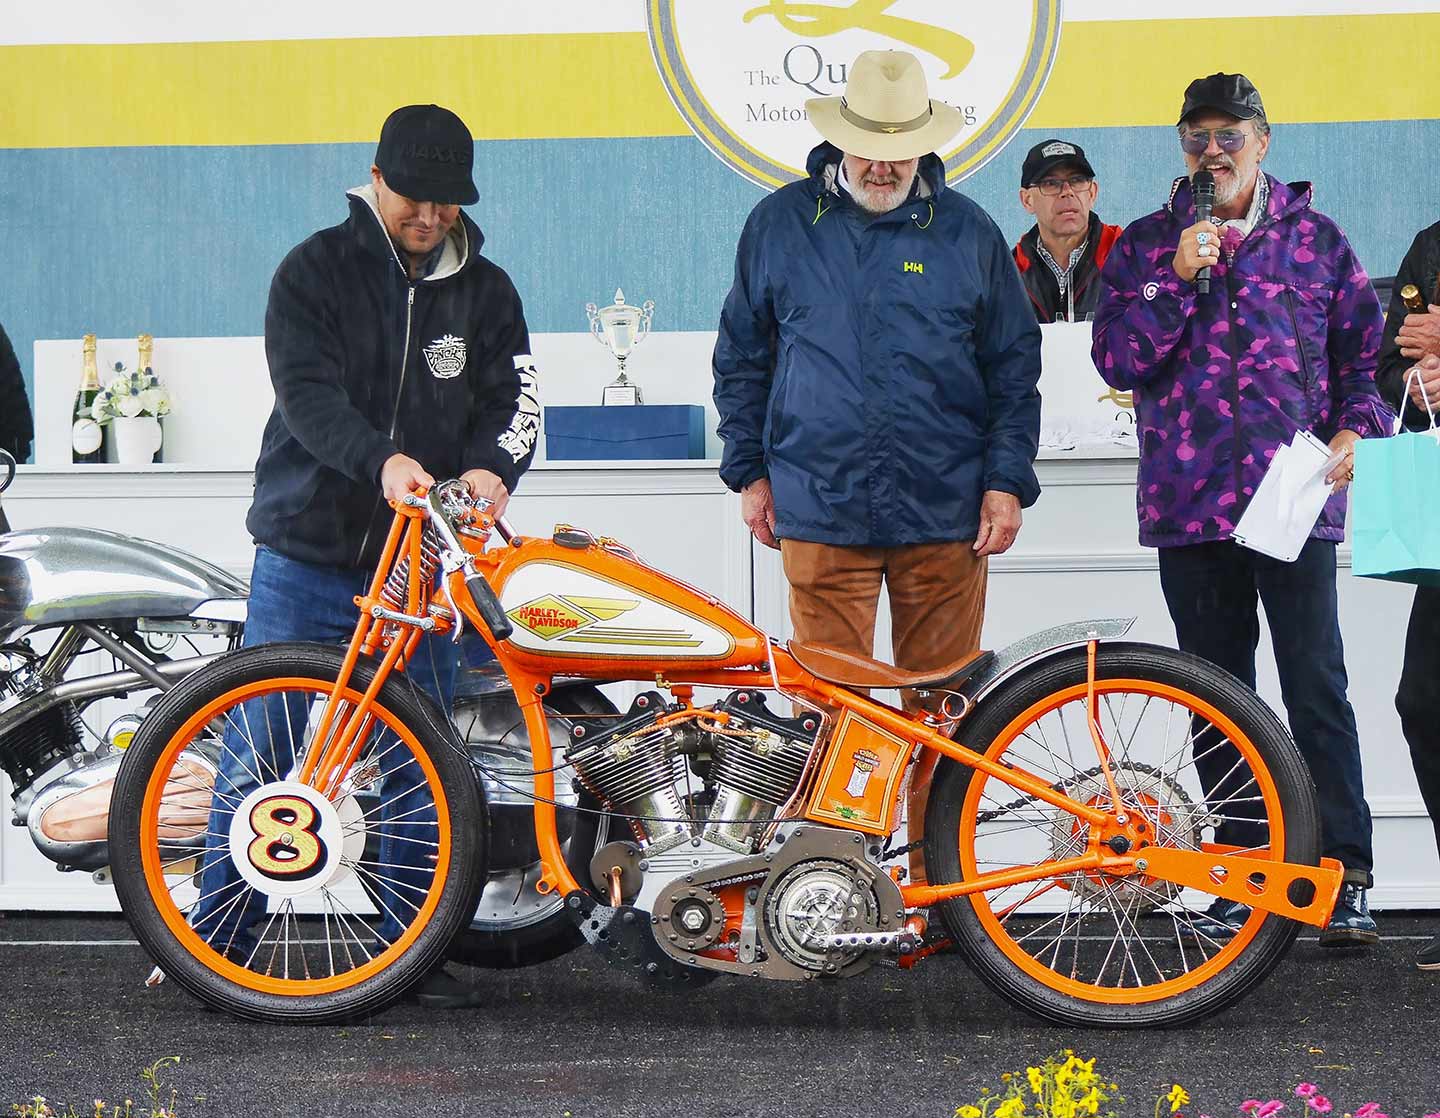 In the Custom/Modified group, first place 
was given to this mod inspired by 1920s Harley-Davidson boardtrack racers,
by Chris Ranuio.